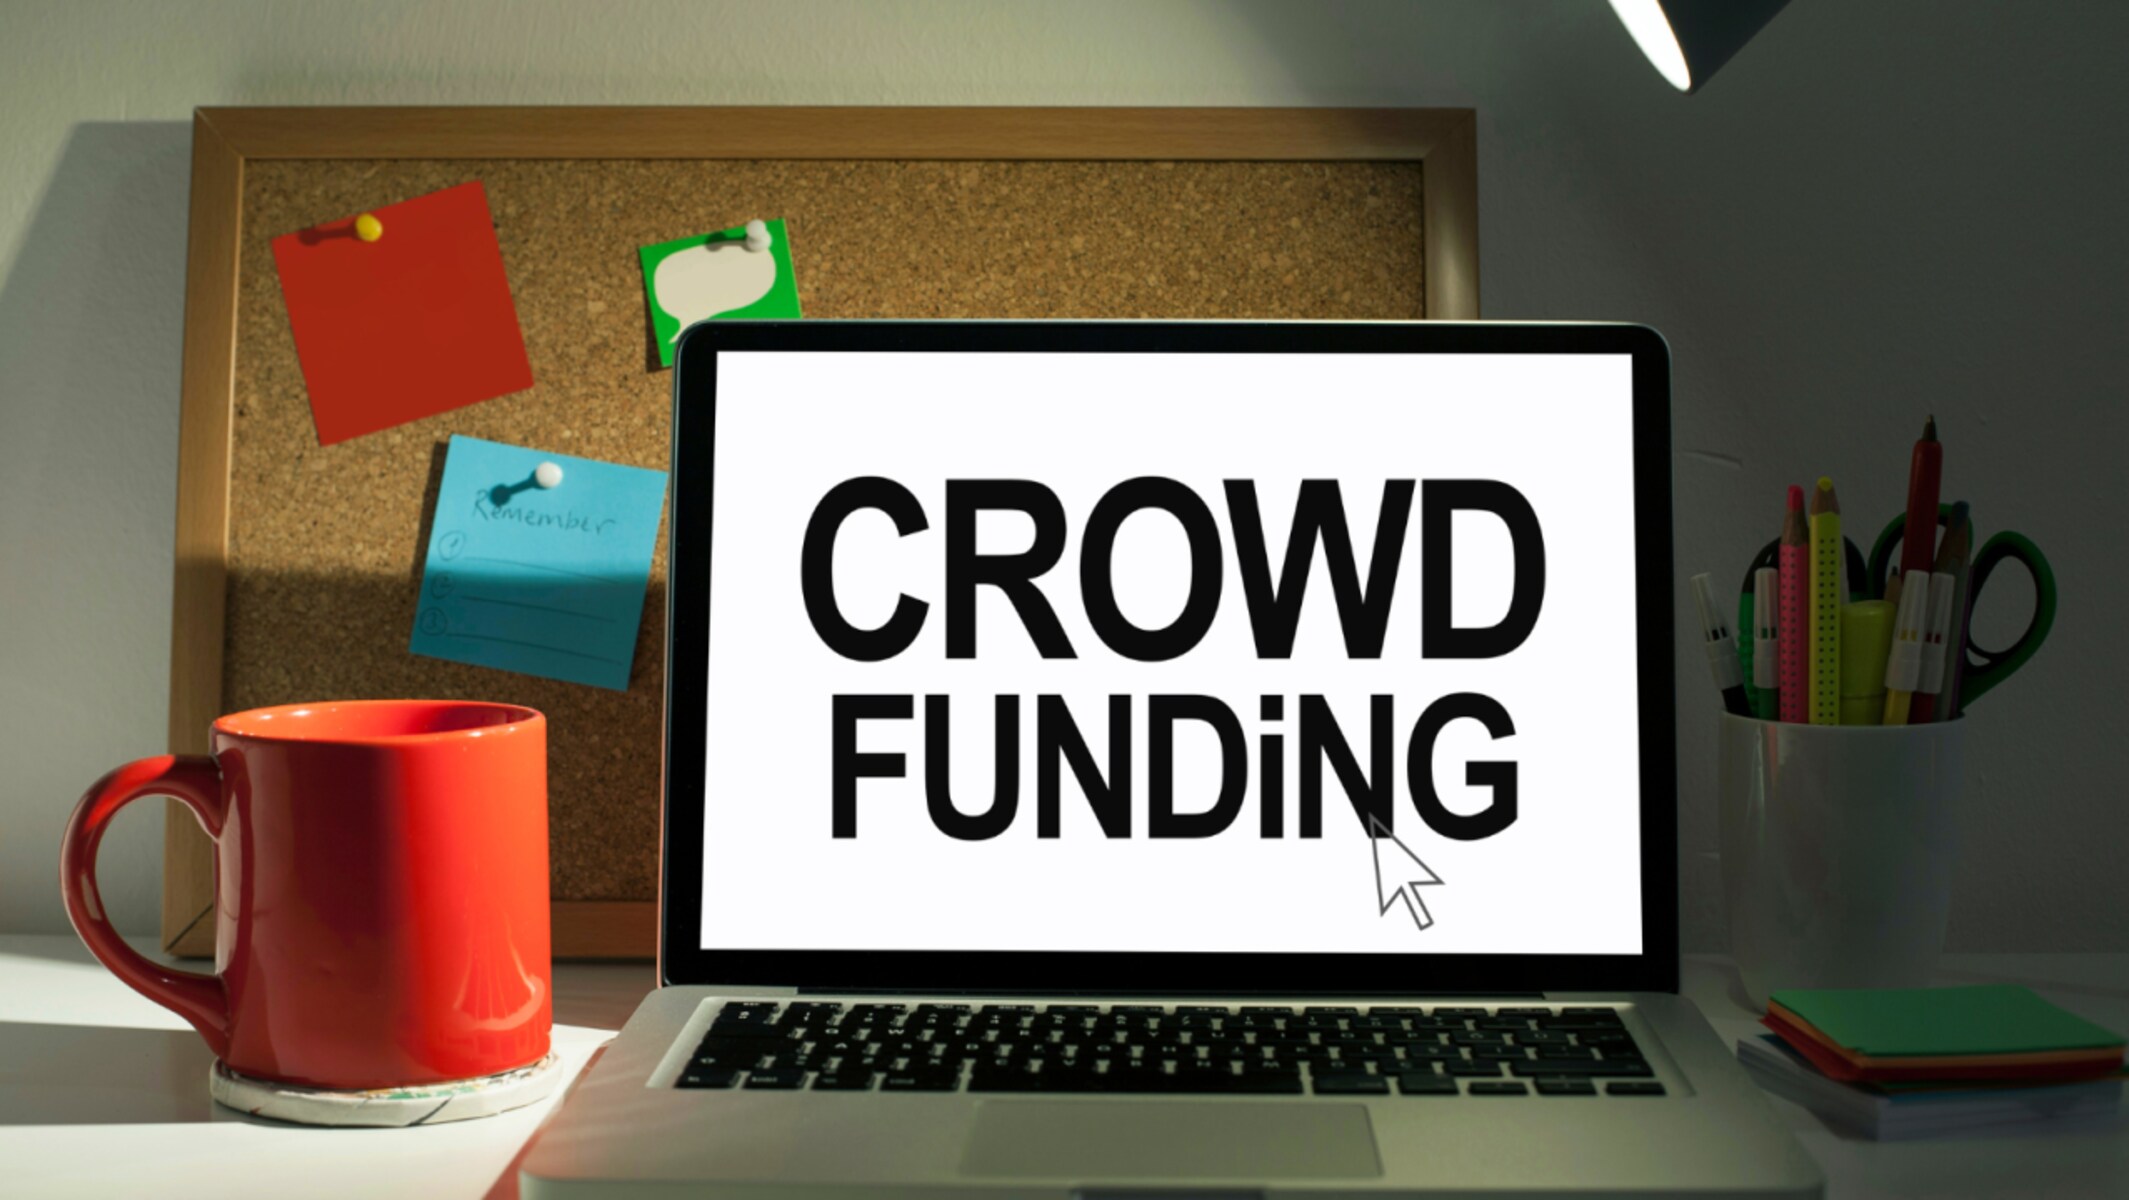 If You Want To Do An Equity Crowdfunding Campaign Which Type Of Business Should You Form